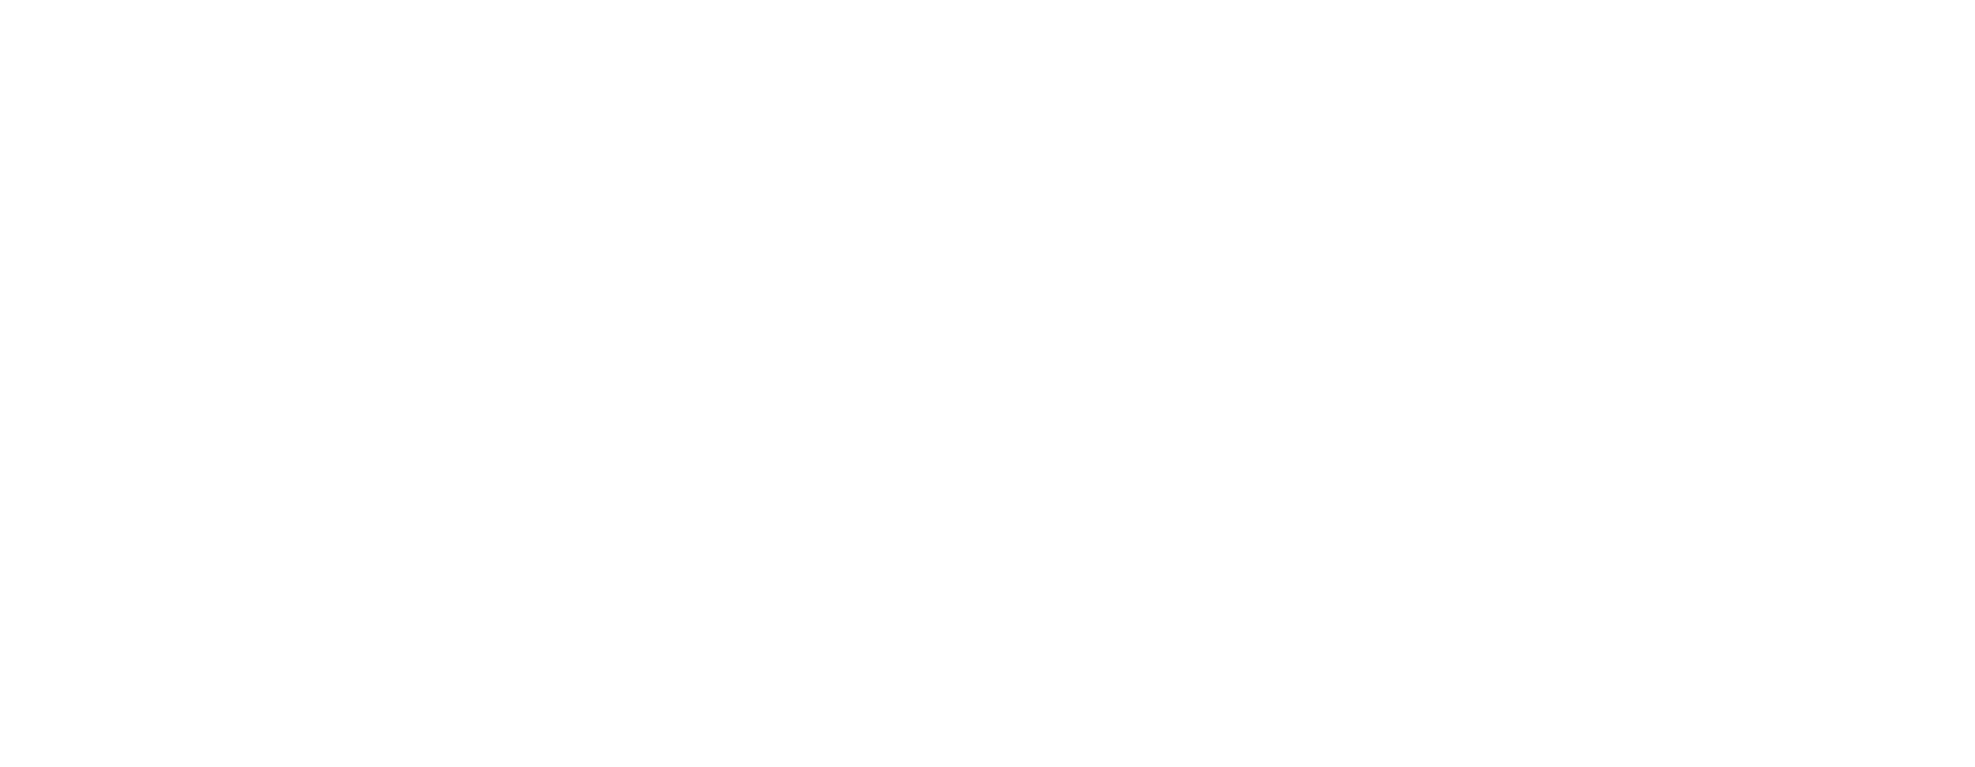 Gordon and Betty Moore Foundation.